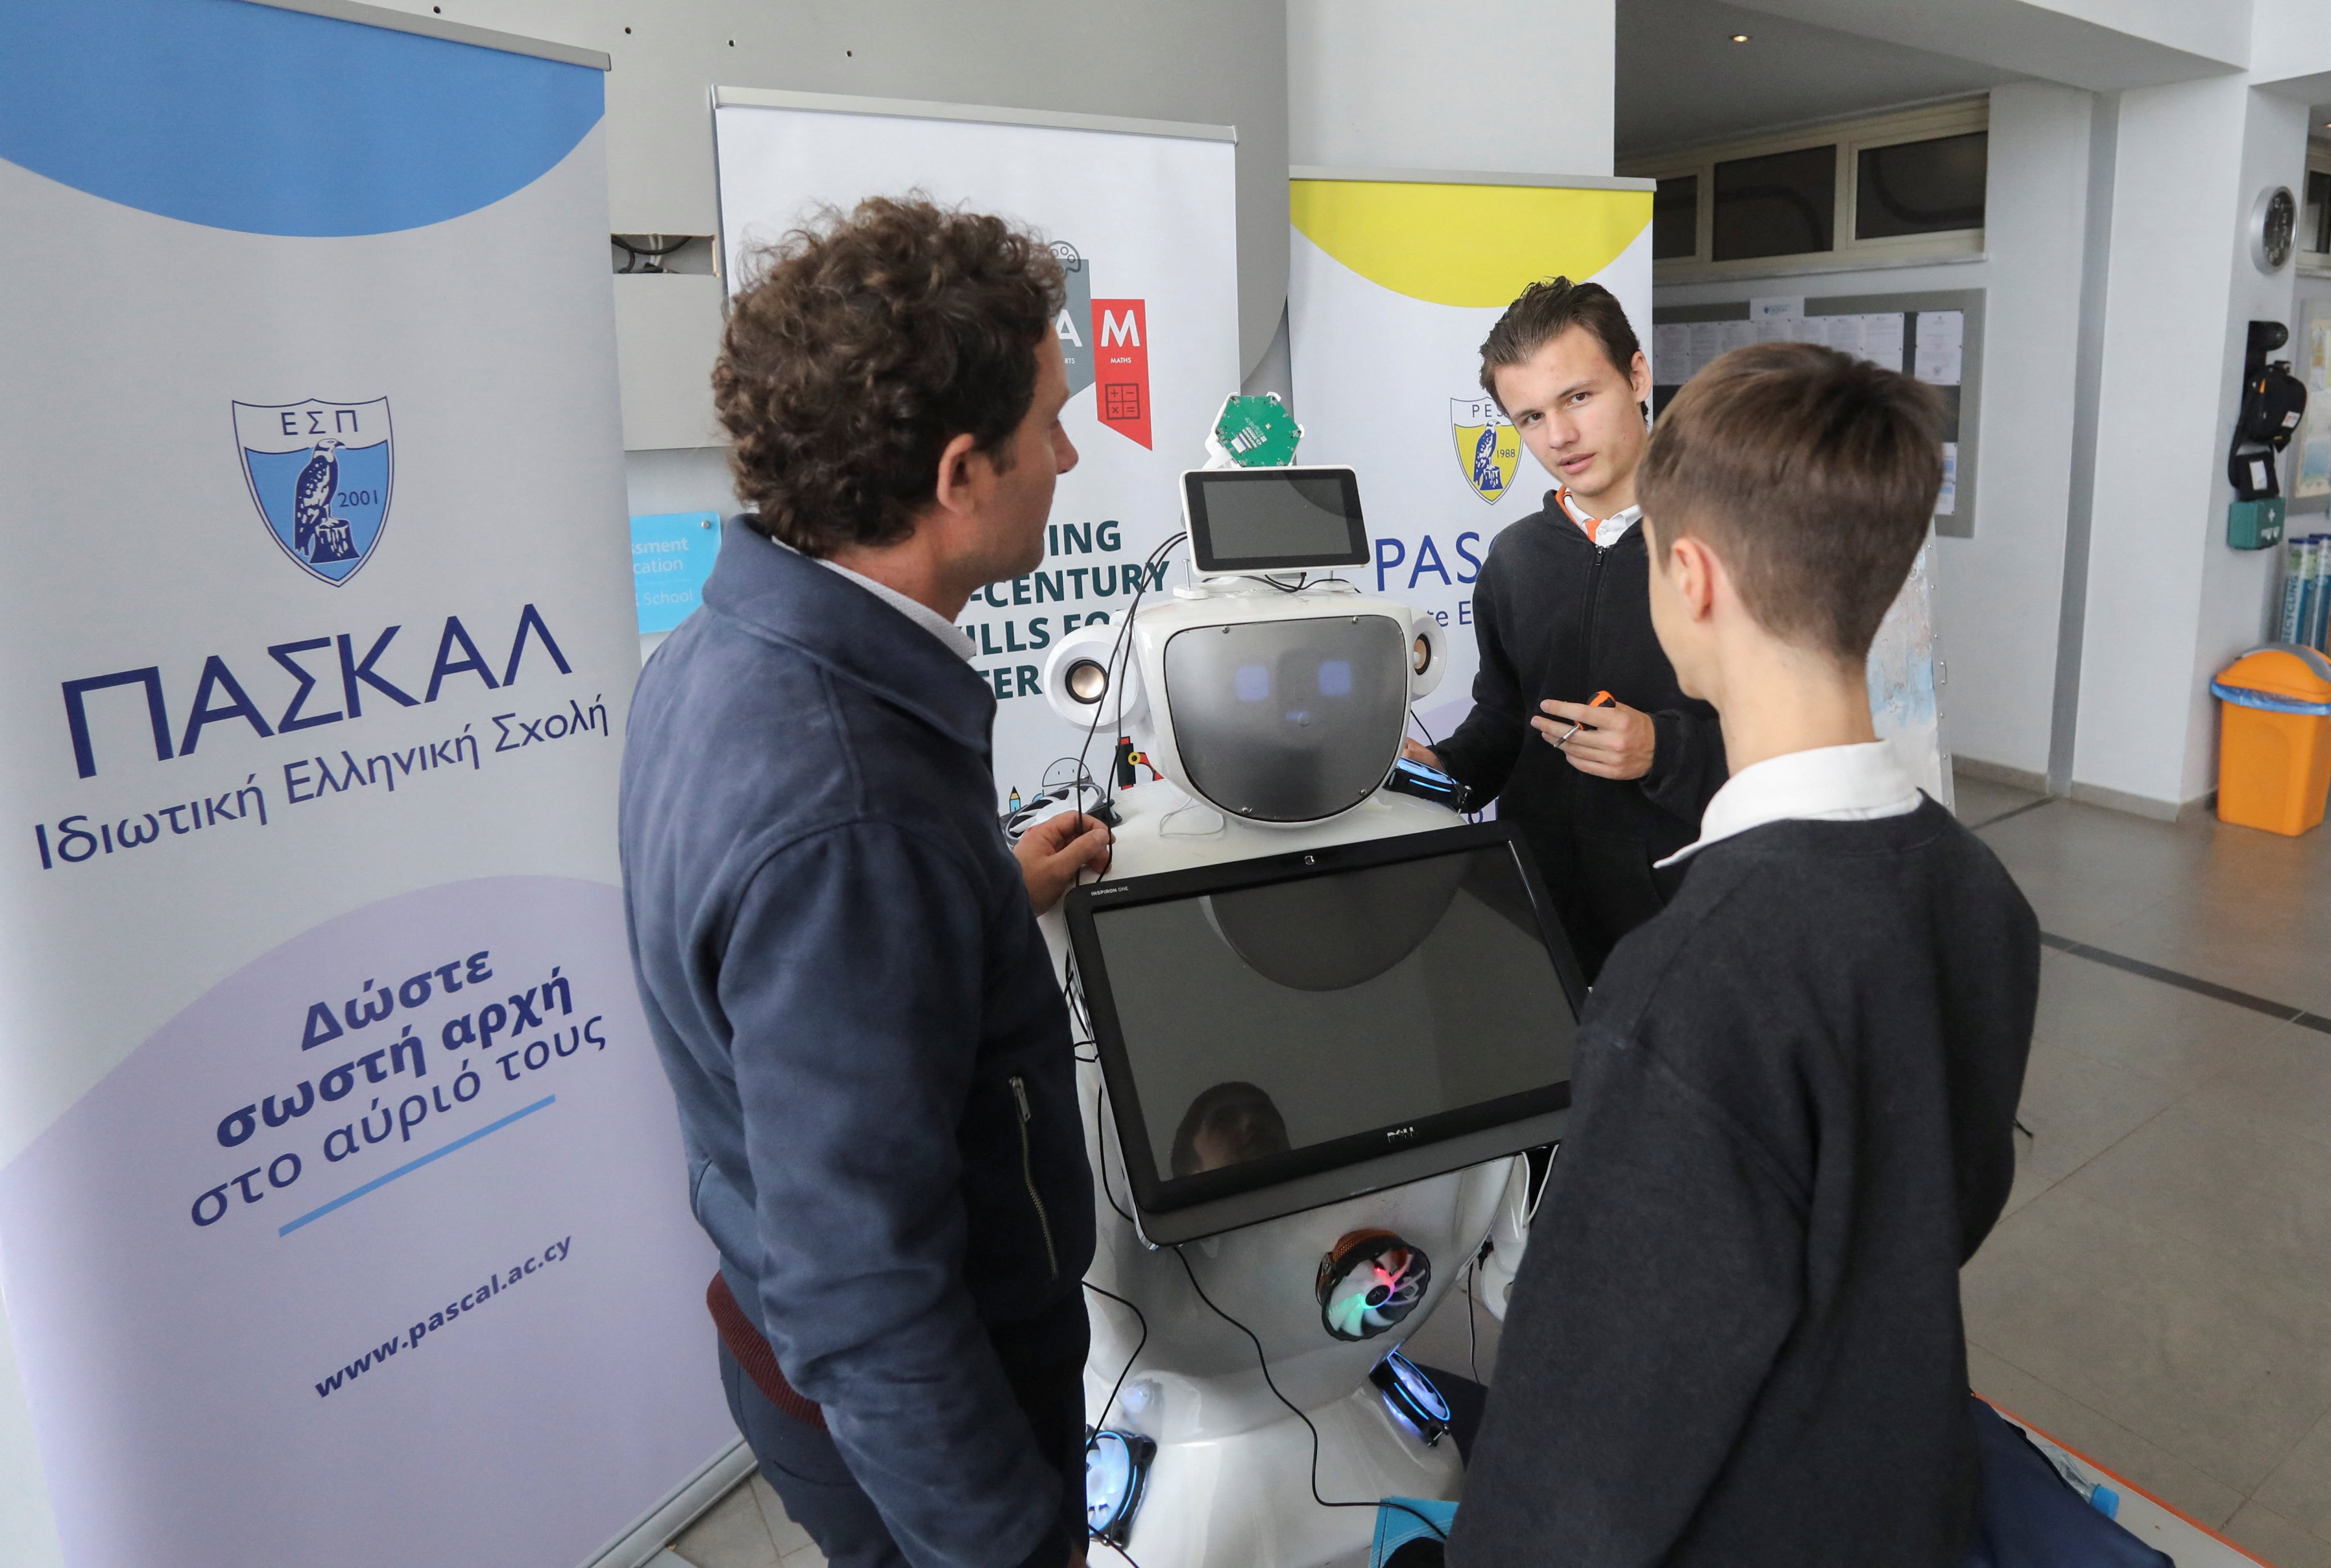 Project leader Elpidoforos Anastasiou and high school students Richard Erkhov and Vladimir Baranov work on “Alnstein”, a robot powered with ChatGPT, in Pascal school, in Nicosia, Cyprus, on March 30. Photo: Reuters